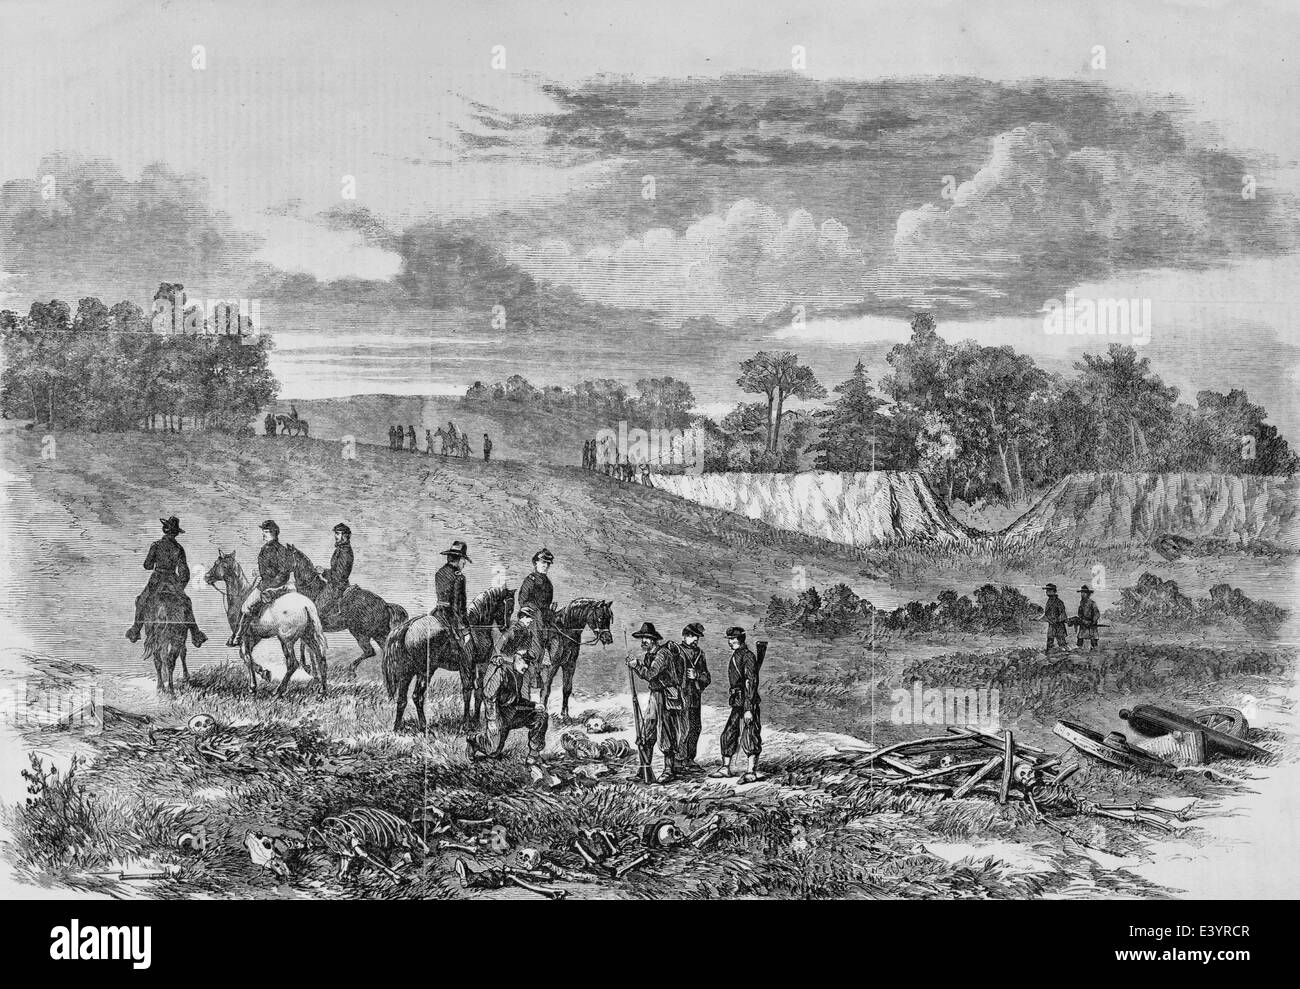 The war in Virginia - Officers and men of Meade's army discovering unburied Union dead on the old battlefield of Bull Run, 1863 Stock Photo